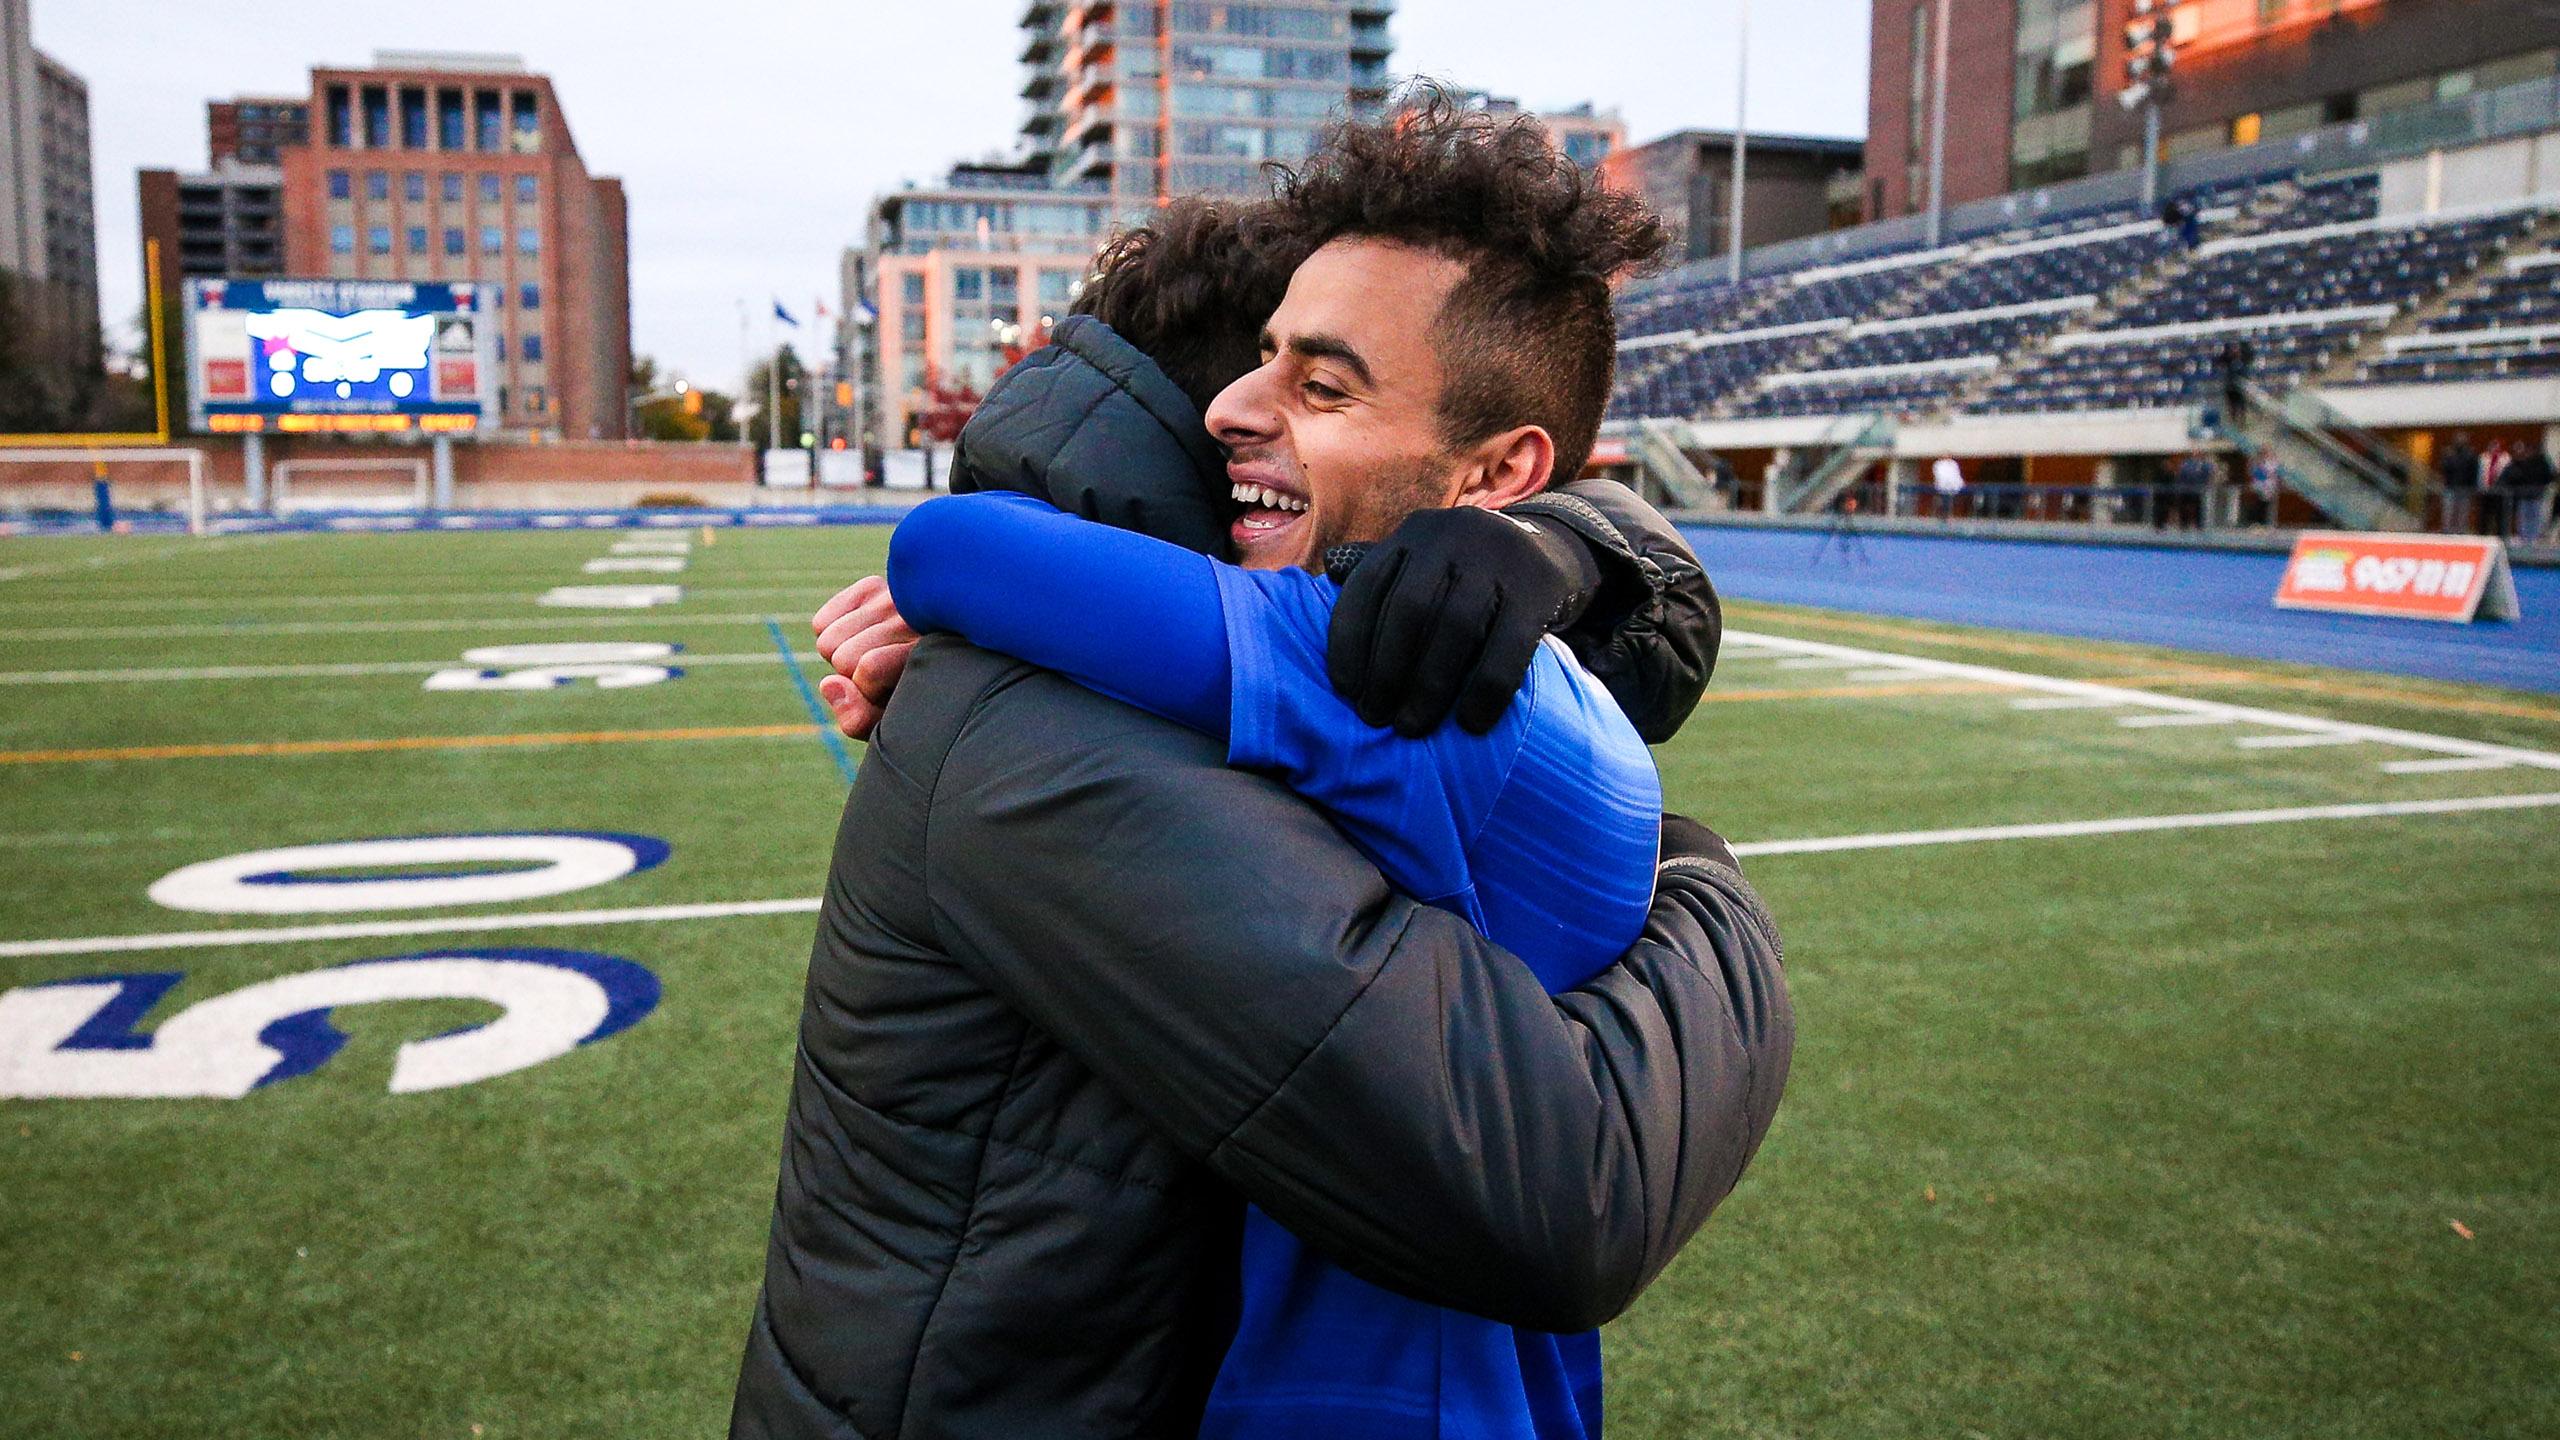 a man wearing a jacket is embraced by a soccer player wearing a blue jersey